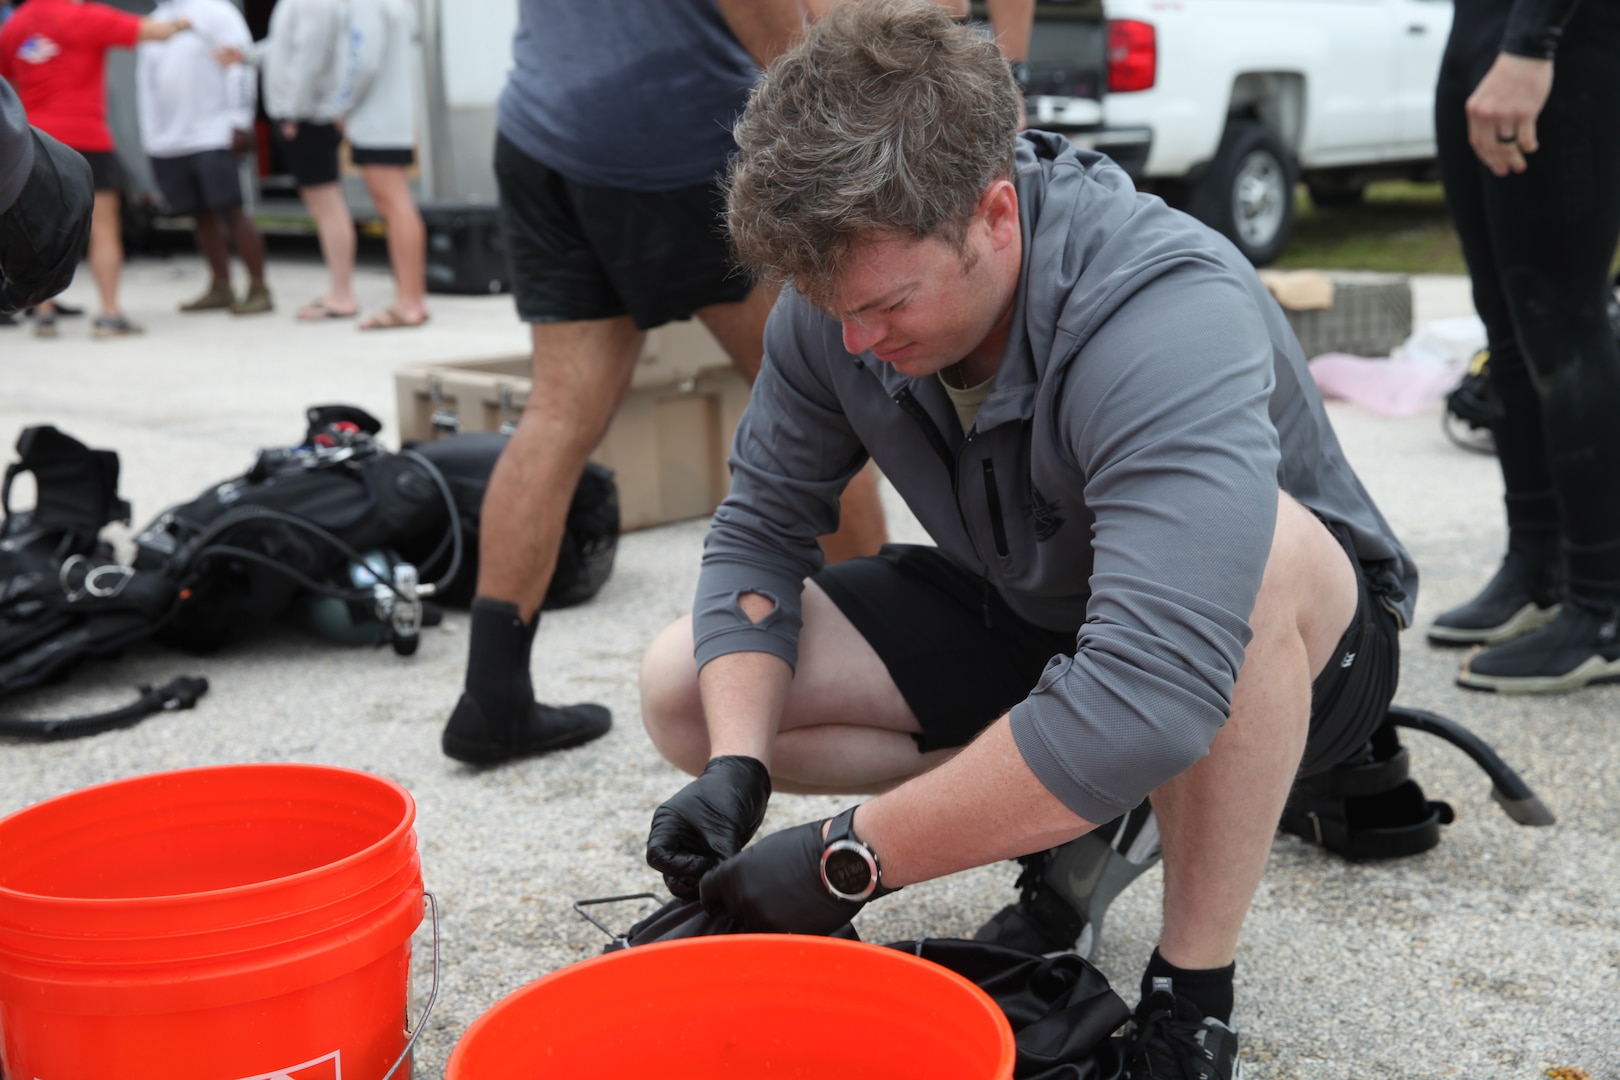 An EOD operator sorts forensic evidence in front of two orange buckets.